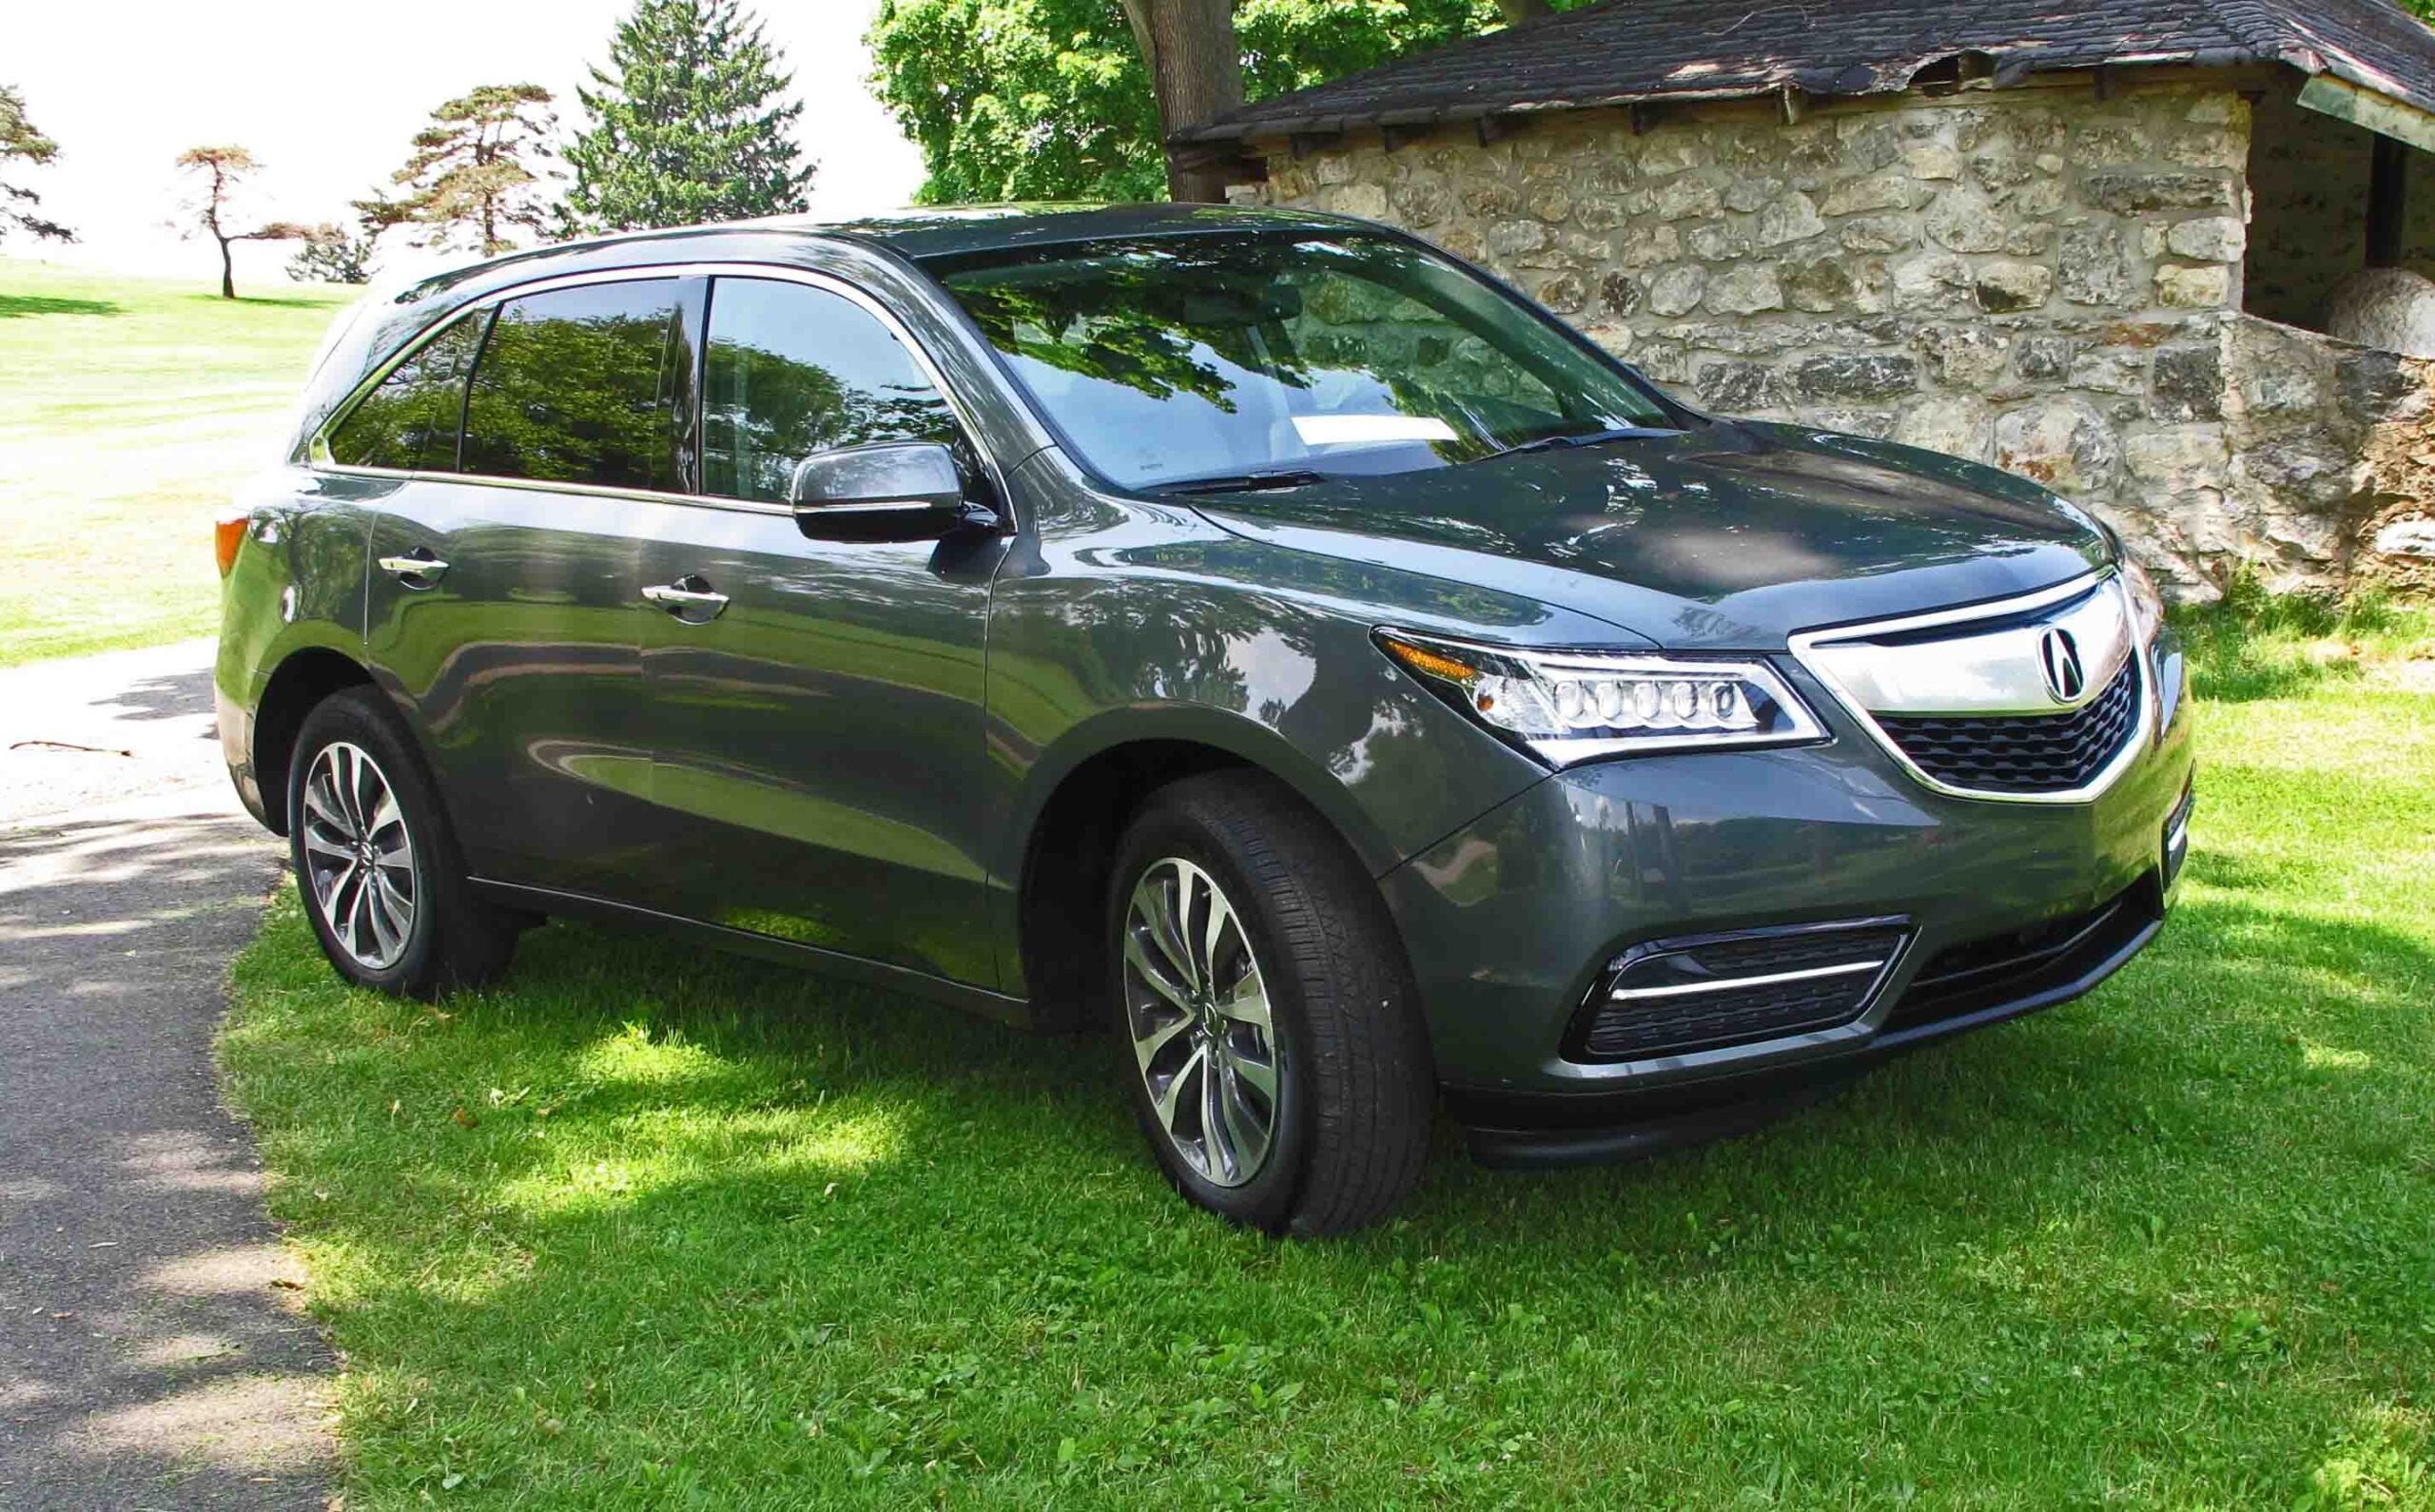 Used 2019 Acura MDX For Sale at Park Place Acura | VIN: 5J8YD4H85KL001270